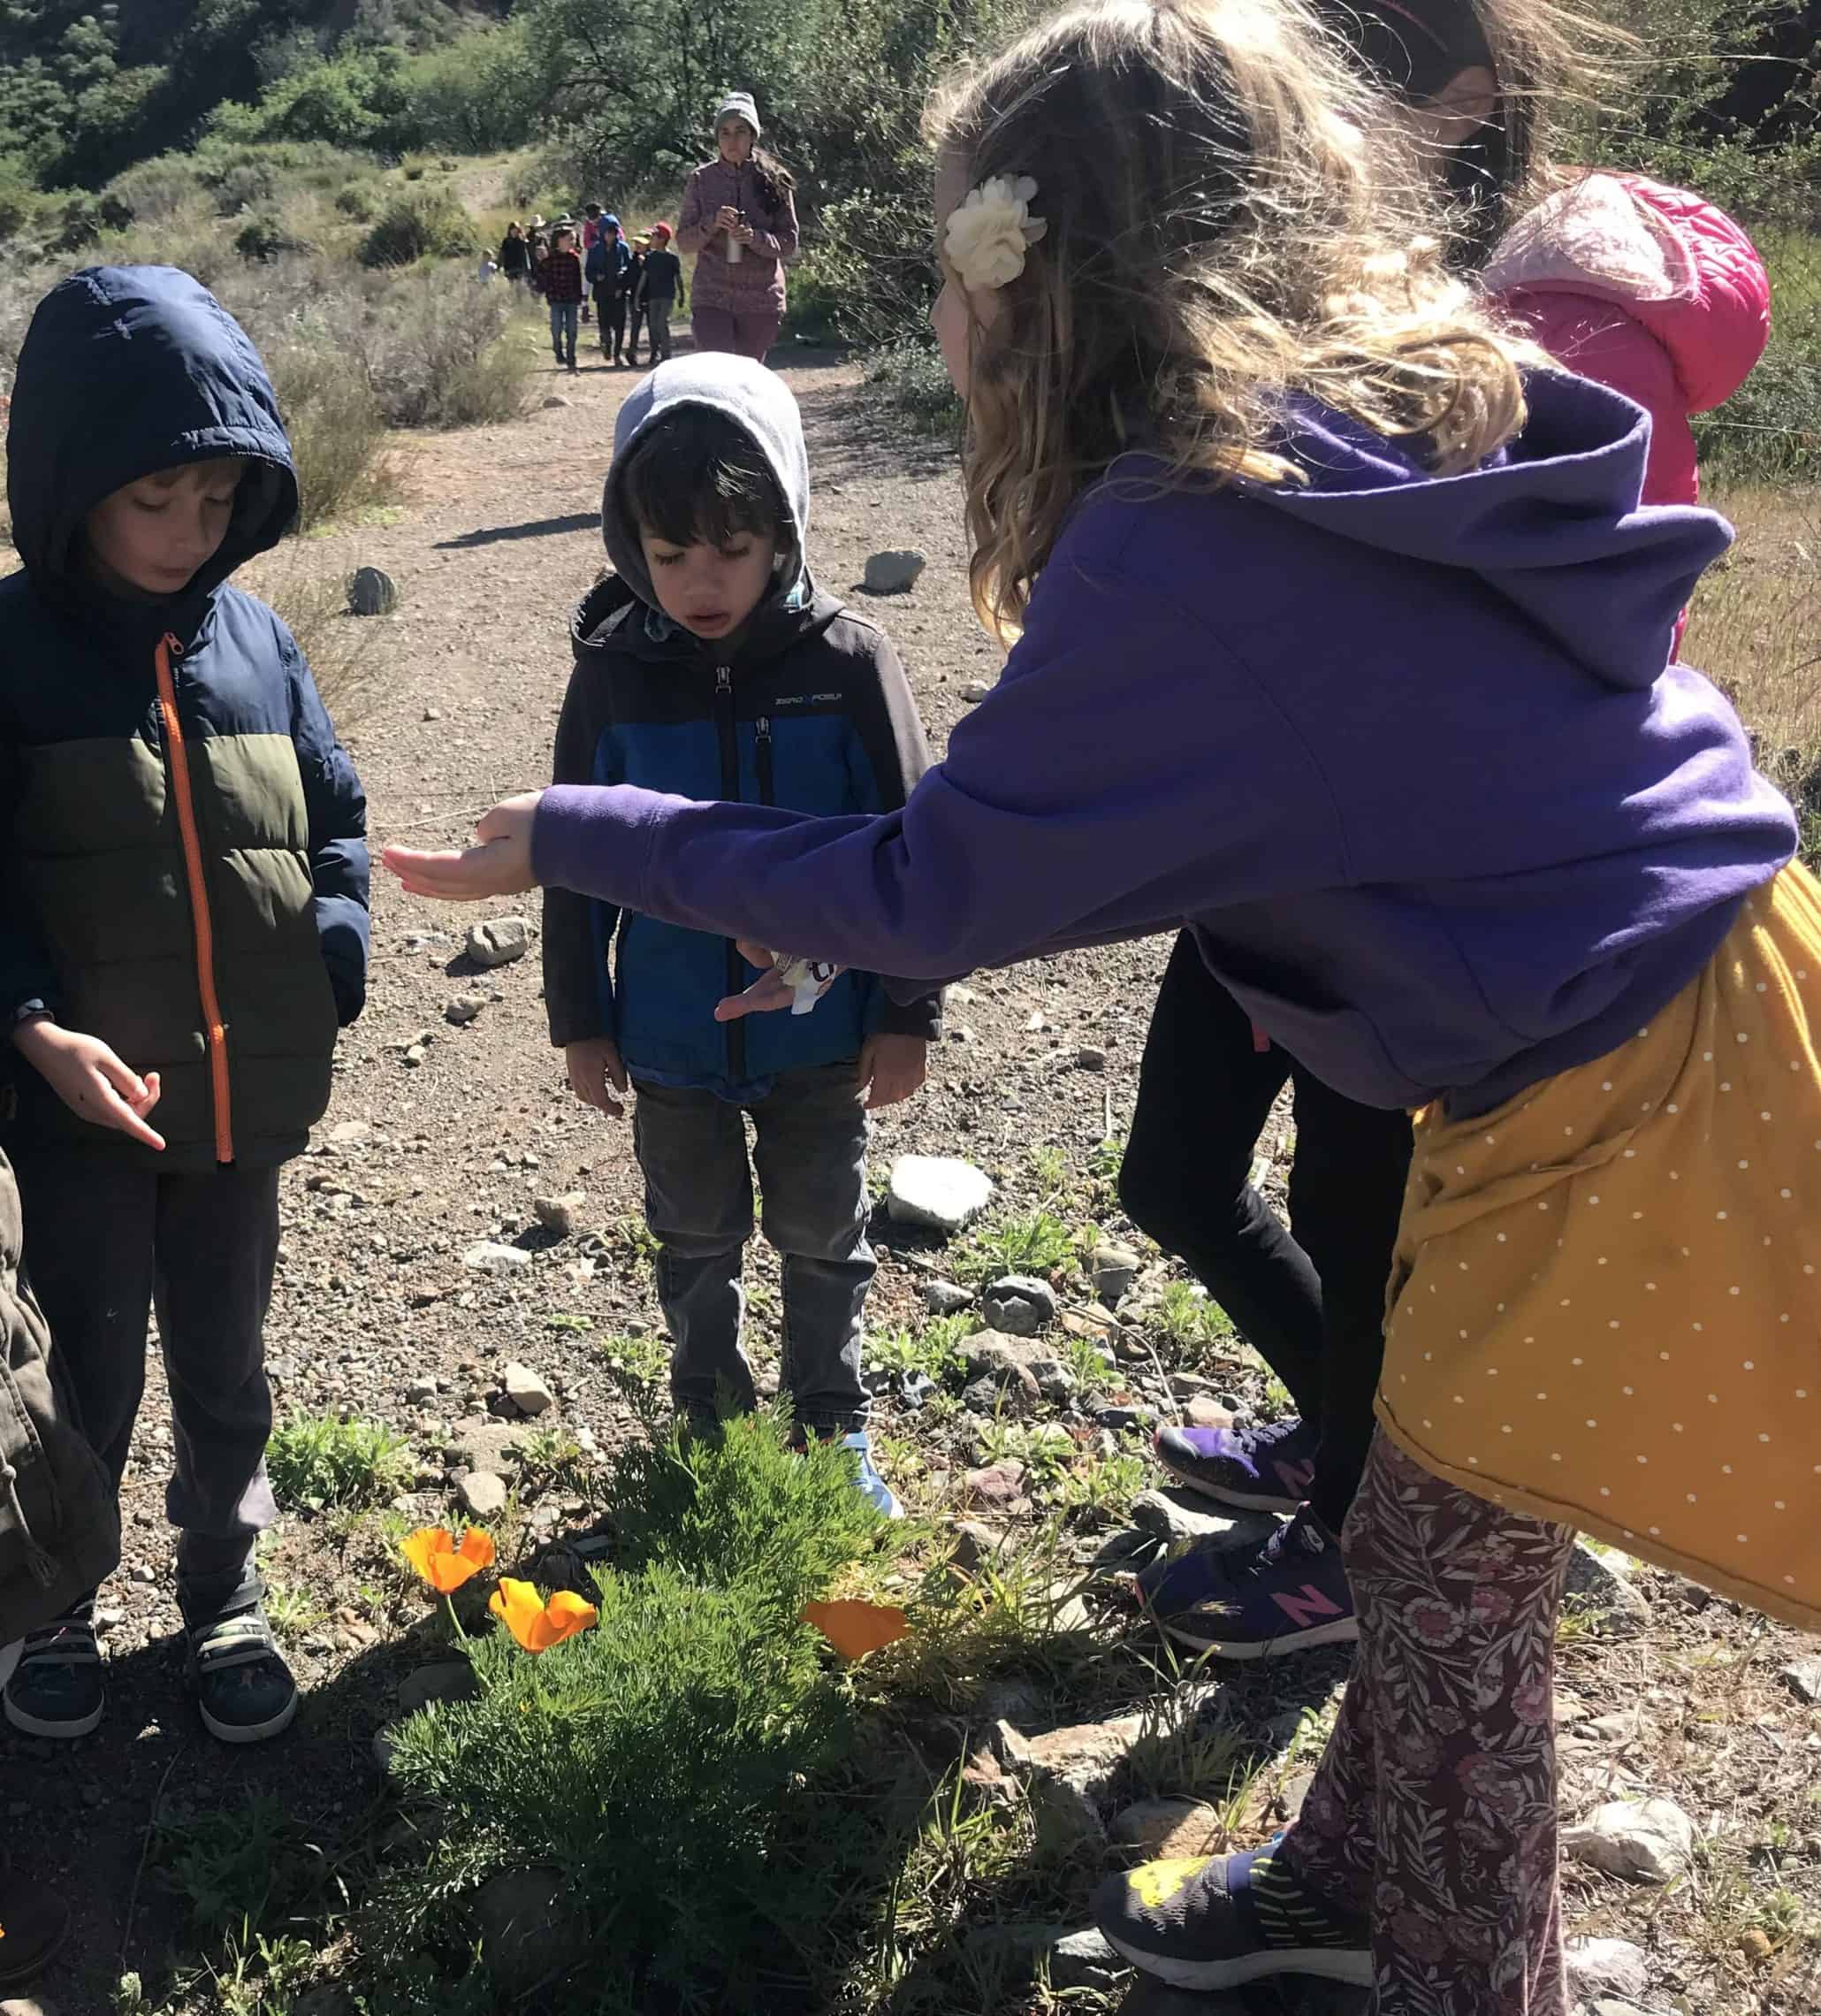 Homeschool Enrichment in Nature students enjoying the spring flowers at Big Oak Canyon